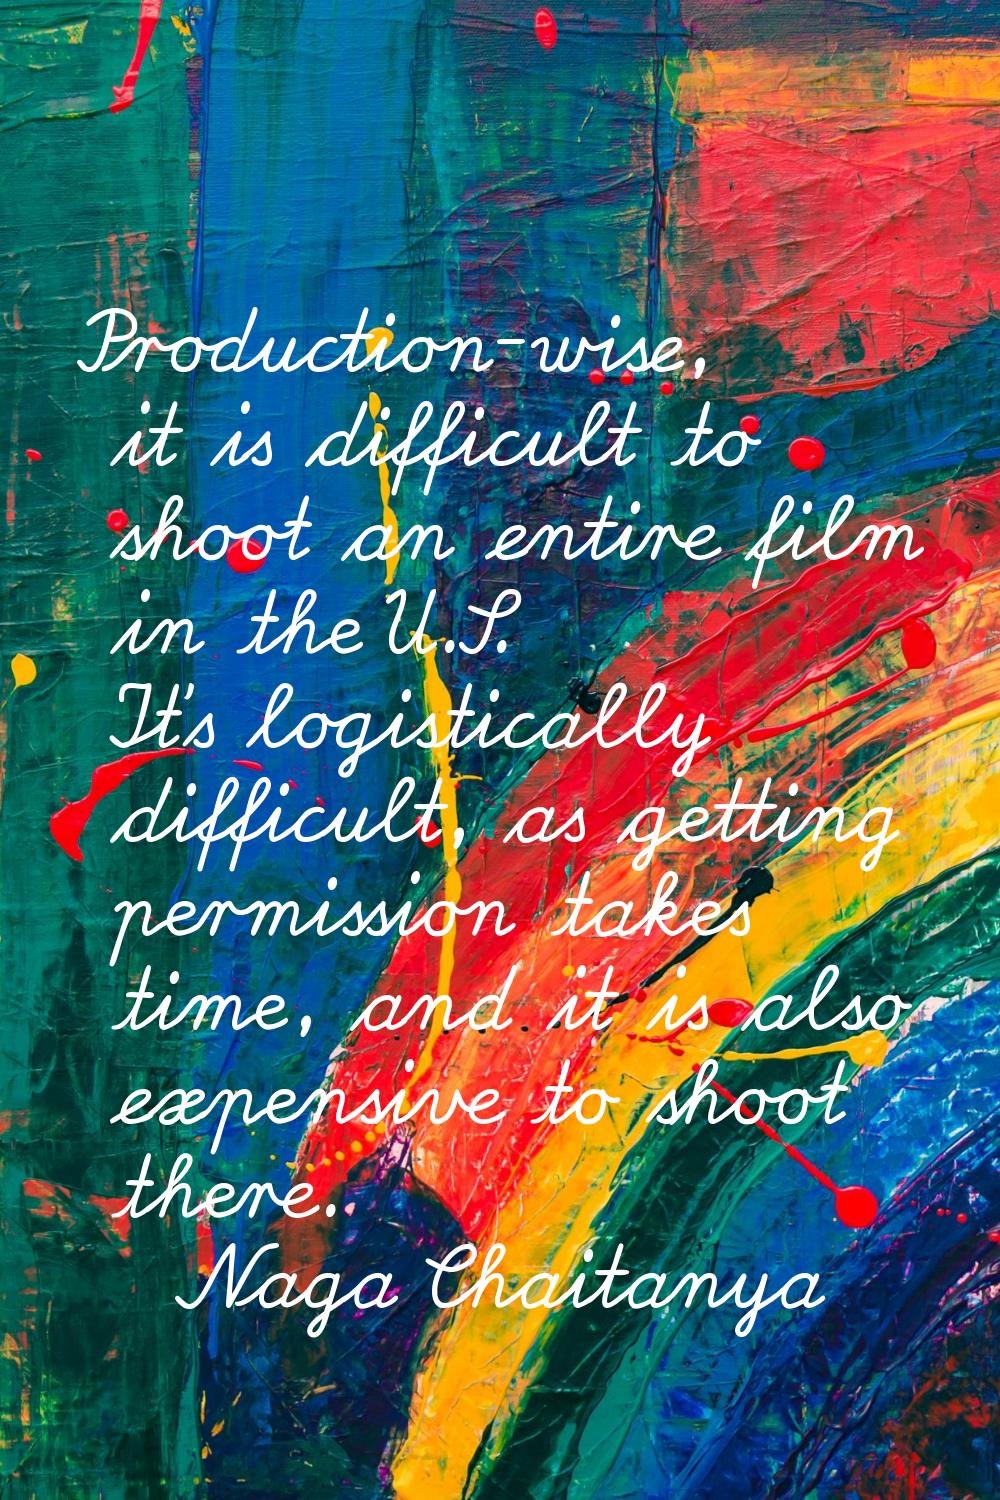 Production-wise, it is difficult to shoot an entire film in the U.S. It's logistically difficult, a